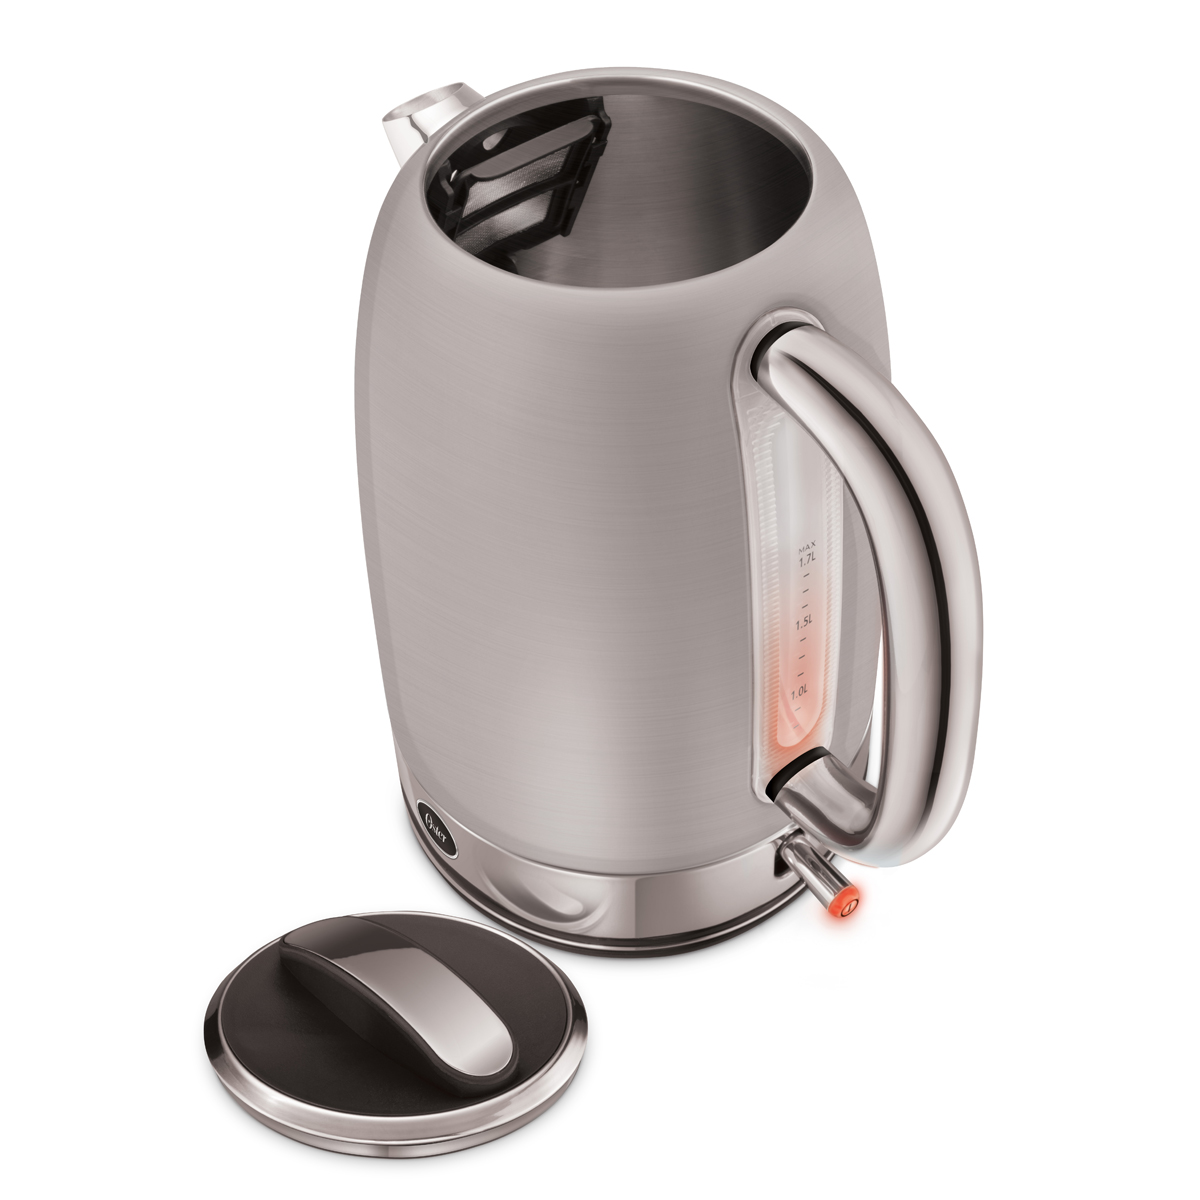 Oster BVSTKT3233W 1.7 Litre Electric Kettle Price in India, Specs, Reviews,  Offers, Coupons, Topprice.in